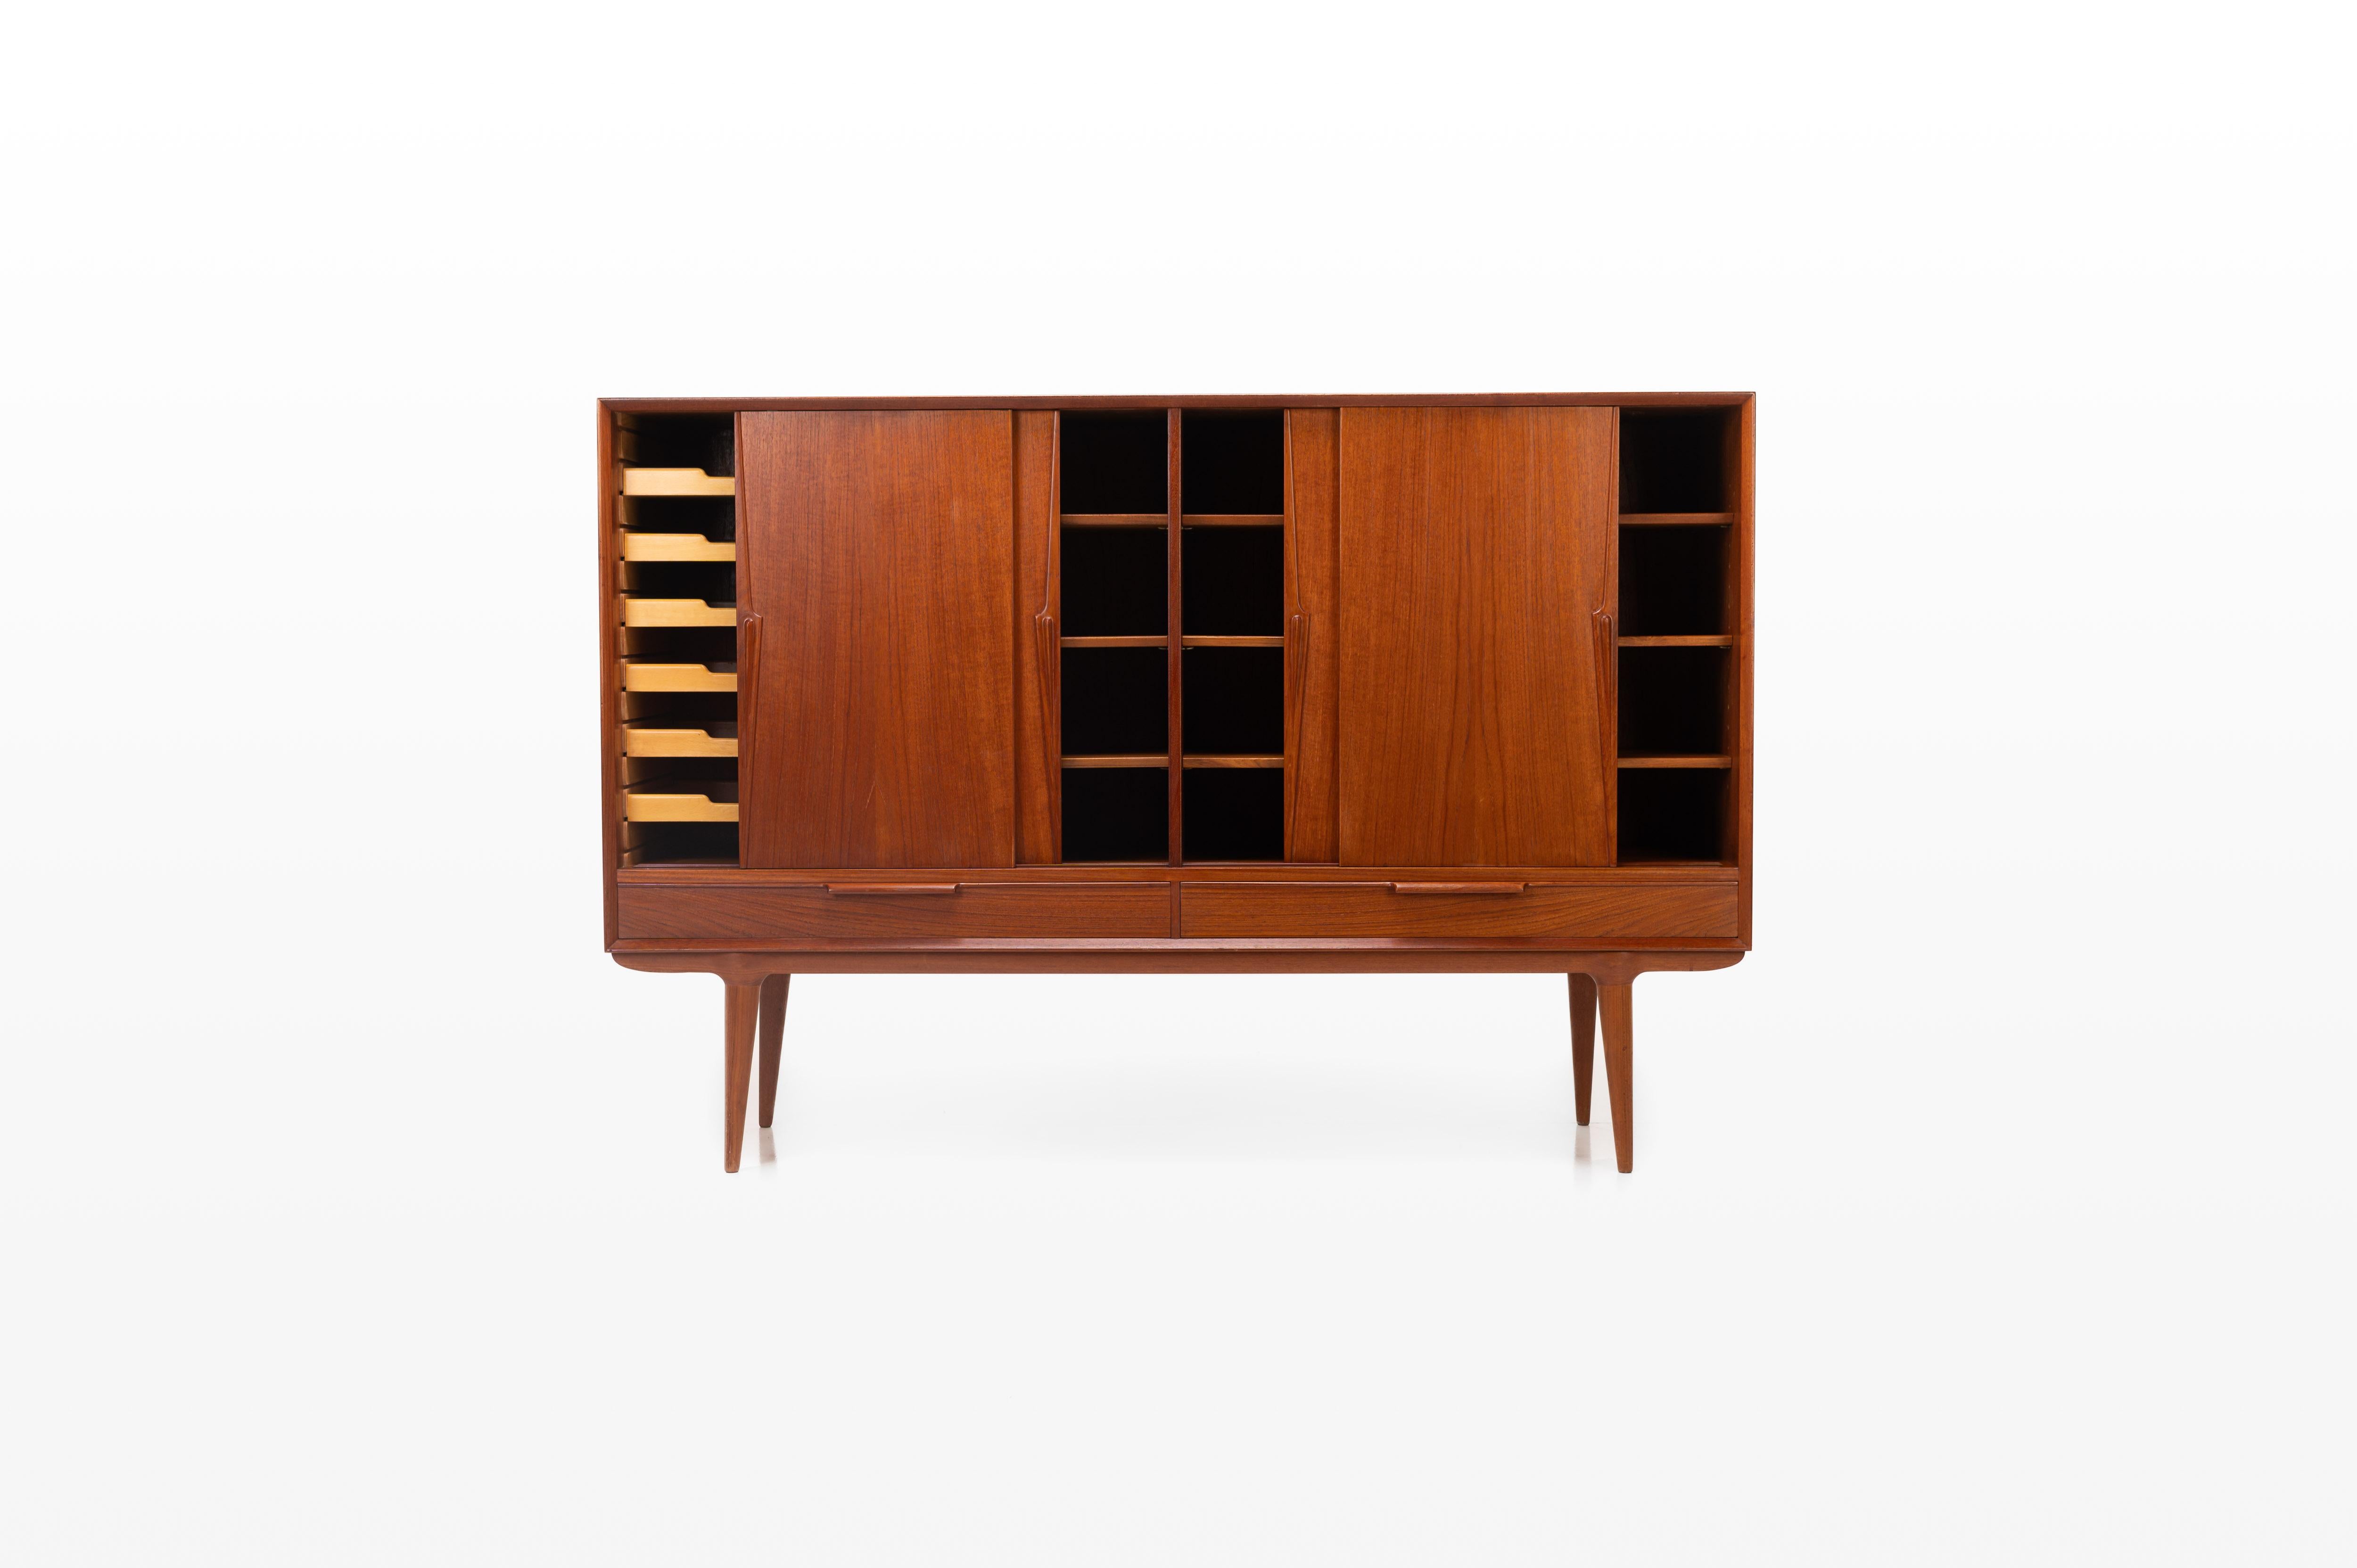 Beautiful teak sideboard from Gunni Omann (Model 13) for Omann Jun Møbelfabrik in Denmark. The sideboard has four sliding doors, 2 drawers and integrated interior drawers. The highboard is in very good condition.